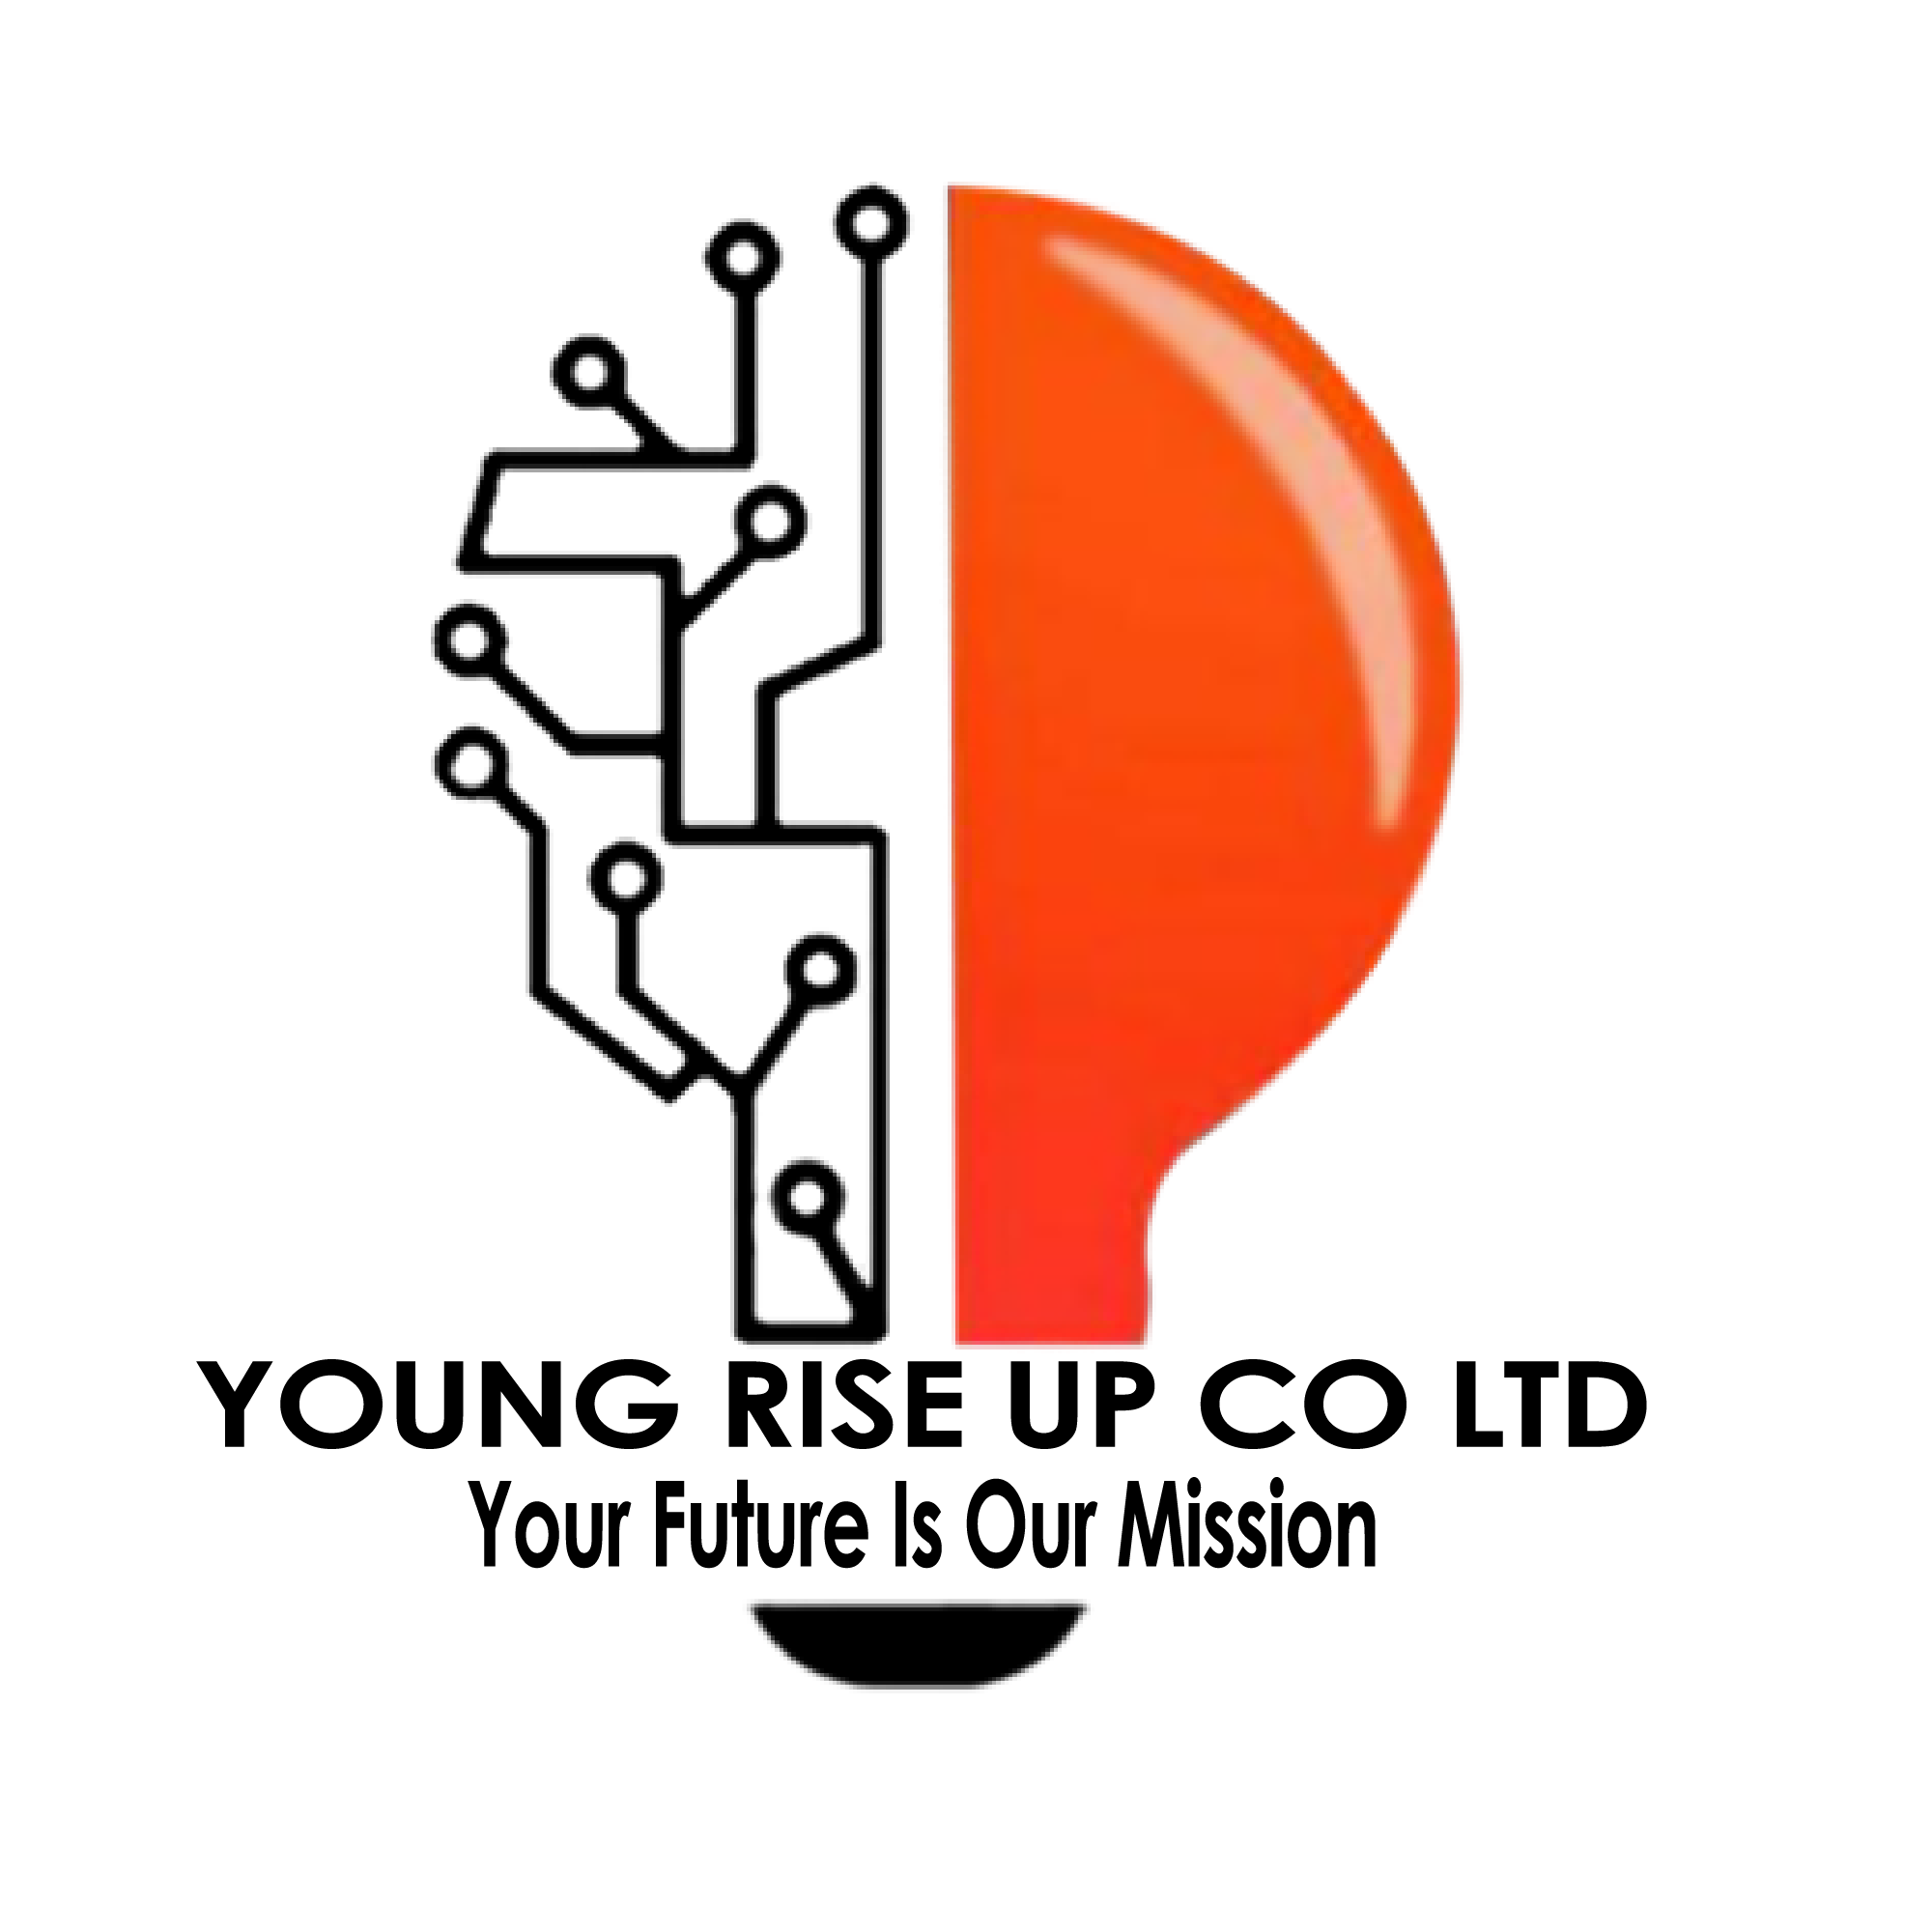 YOUNG RISE UP CO LTD